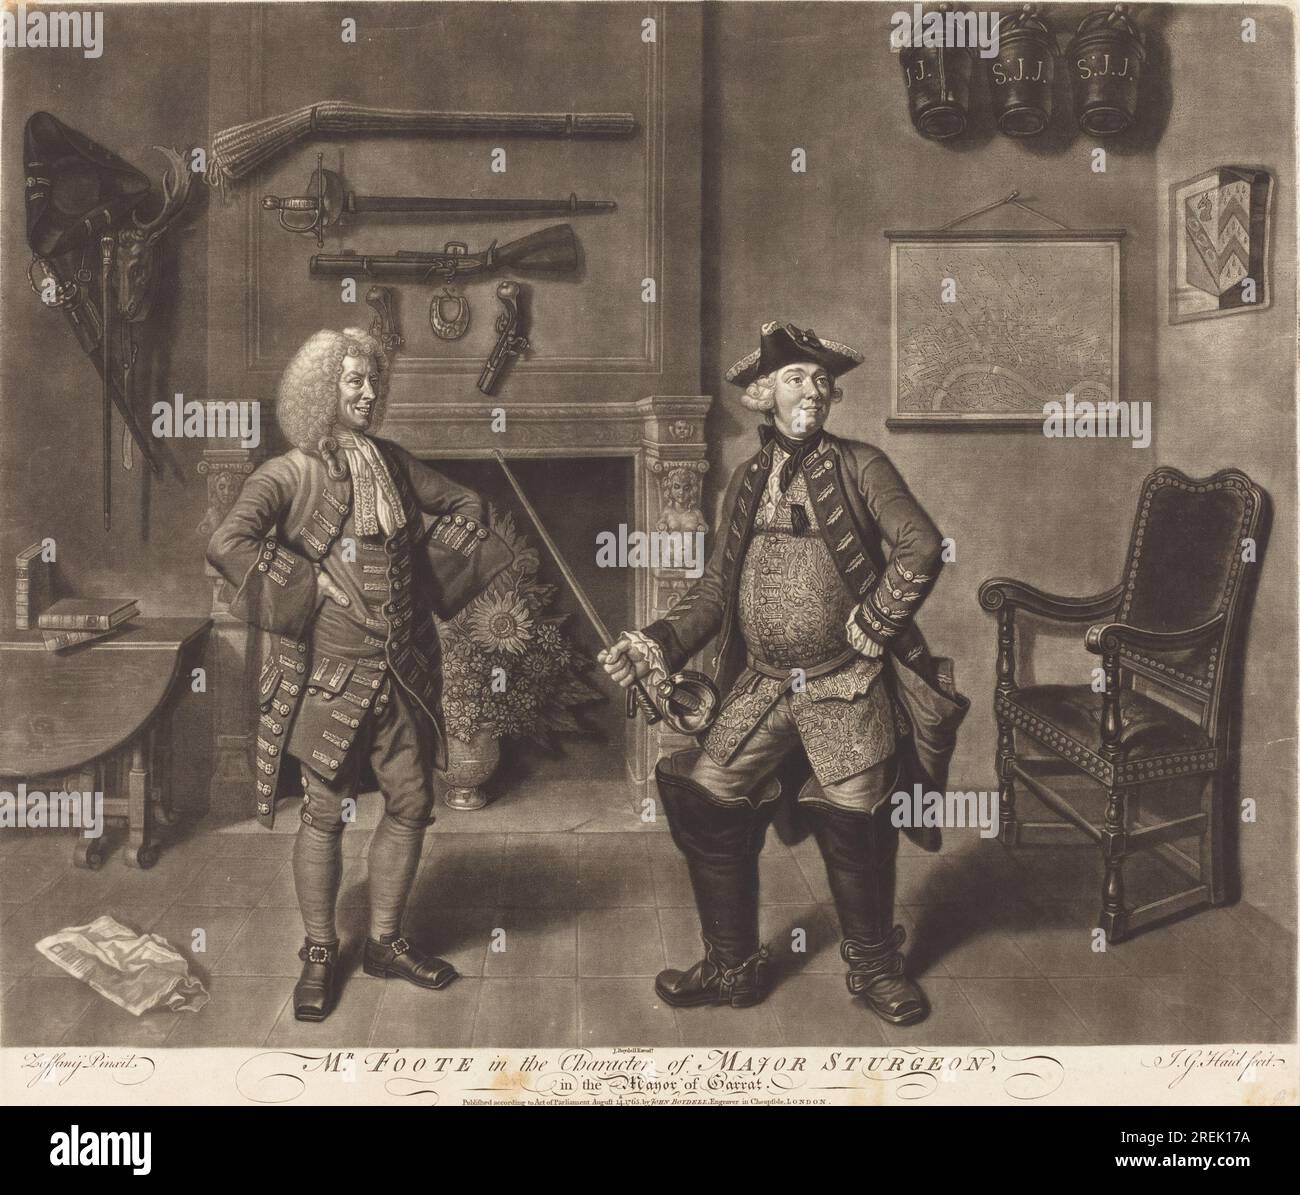 'Johann Gottfried Haid after Johann Zoffany, Mr. Foote in the Character of Major Sturgeon, in the Mayor of Garrat, 1765, mezzotint on laid paper, plate: 43.1 x 50.5 cm (16 15/16 x 19 7/8 in.) sheet: 43.5 x 51.2 cm (17 1/8 x 20 3/16 in.), Paul Mellon Fund, 2001.118.12' Stock Photo